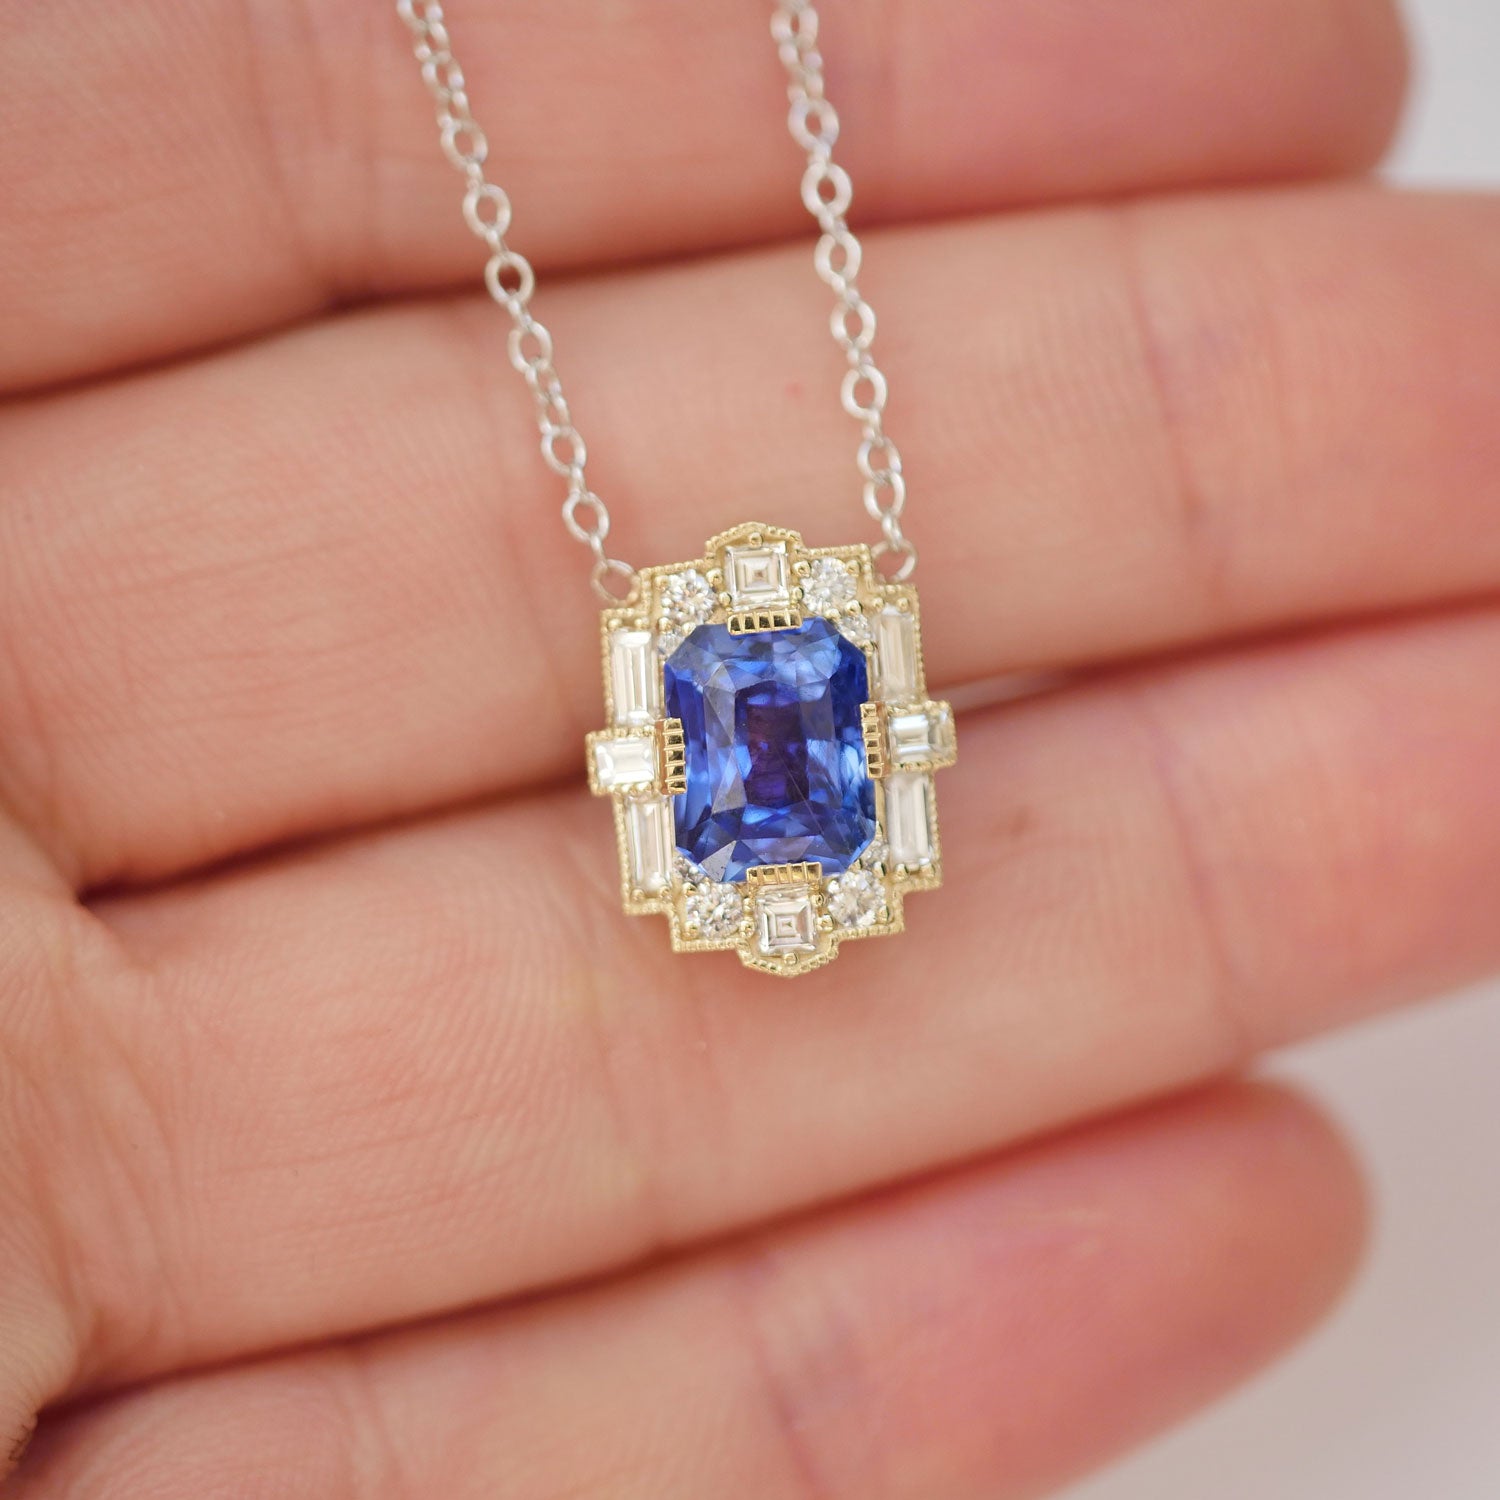 16 Inch Alternating Sapphire and Diamond Tennis Necklace In White Gold |  New York Jewelers Chicago